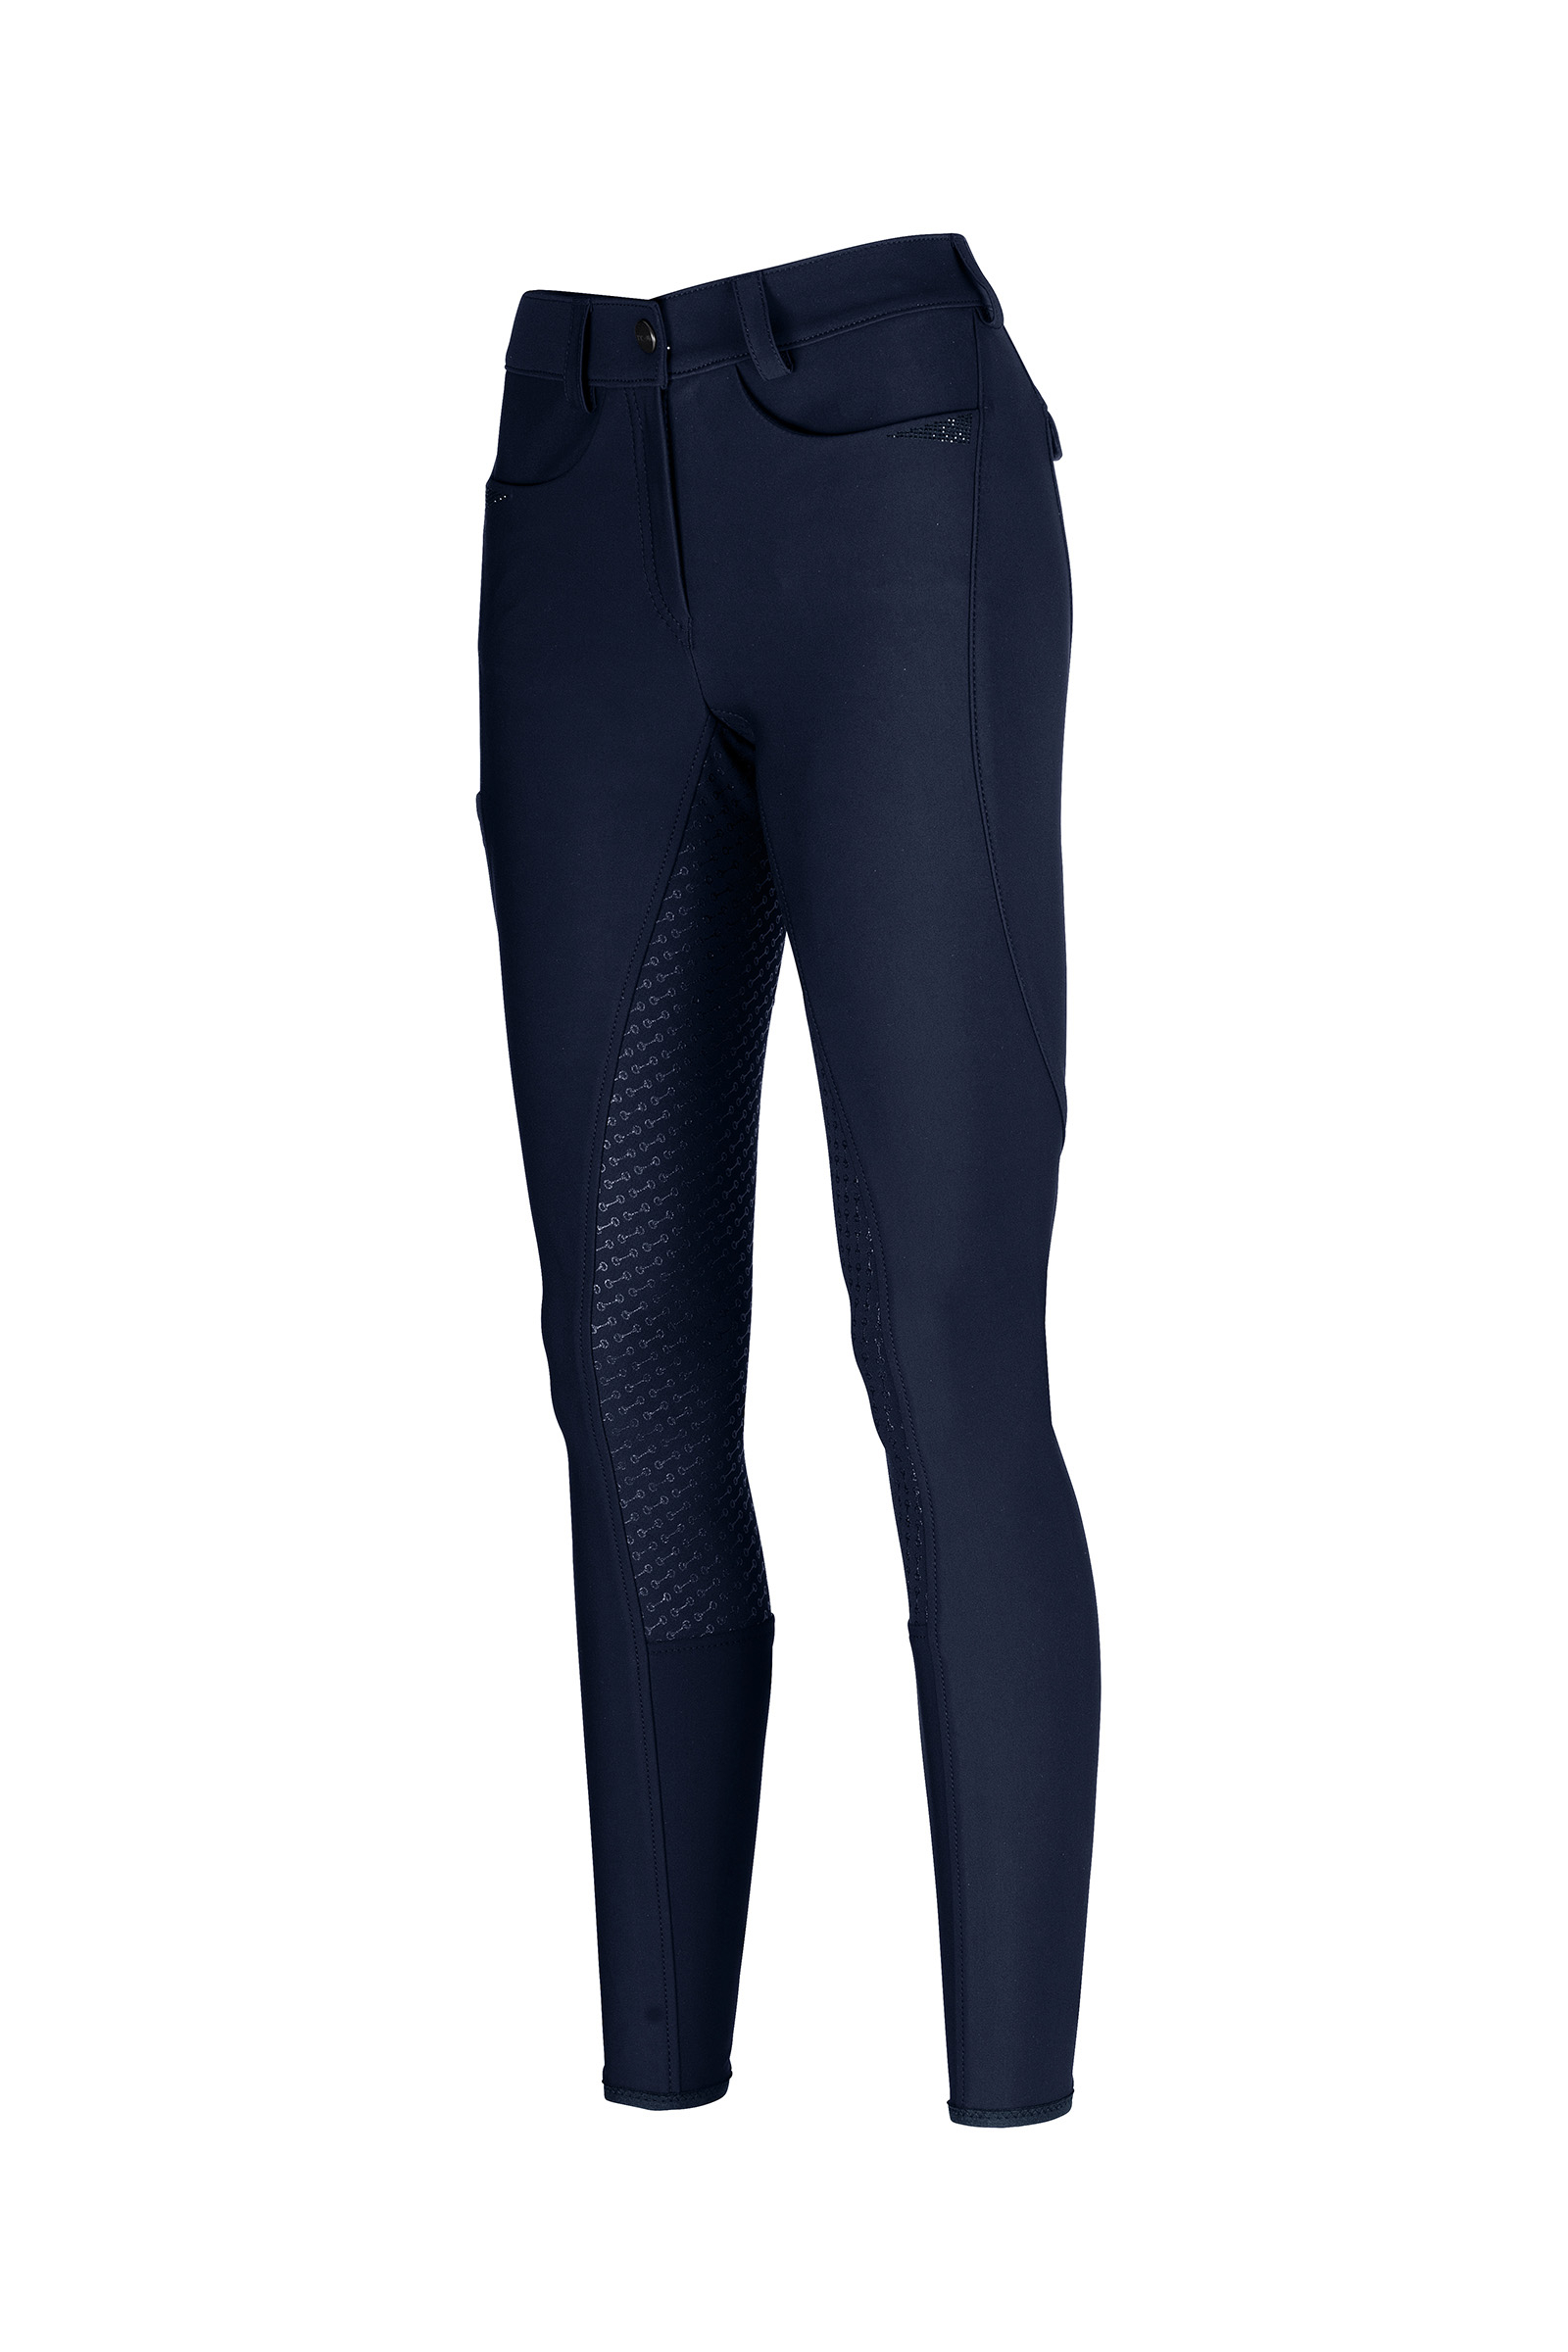 Horze Anna Women's Silicone Full Seat Breeches with Phone Pocket